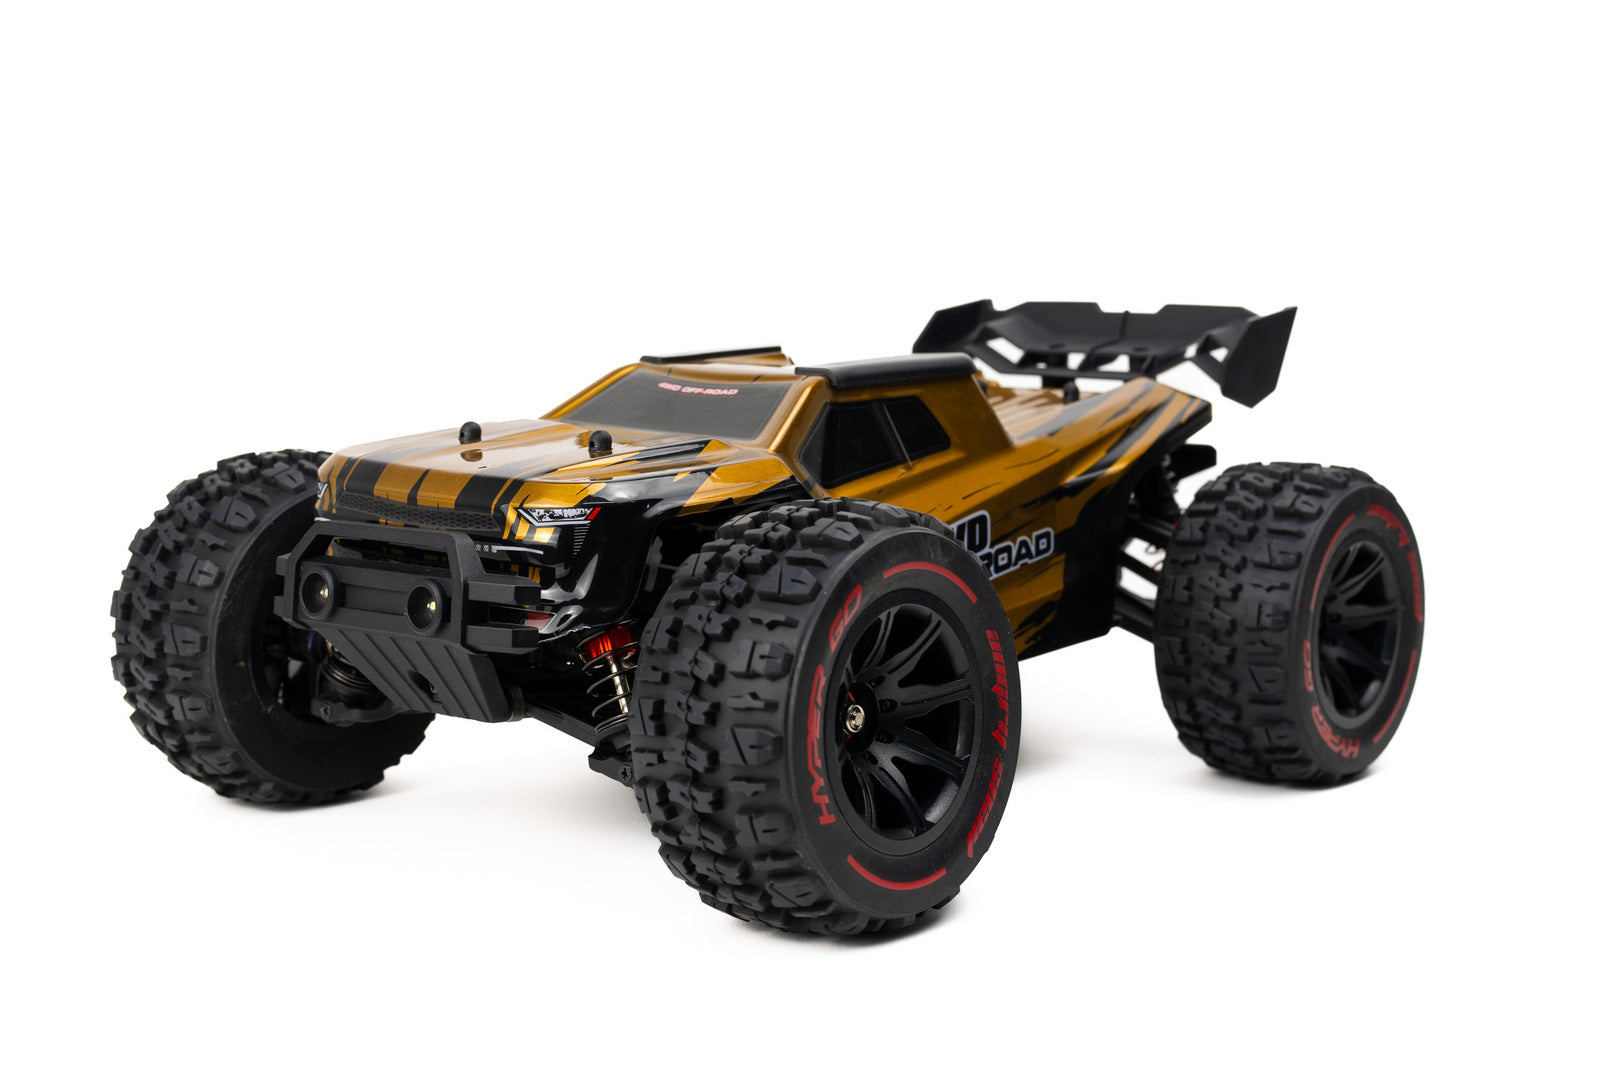 MJX 1/14 Hyper Go 4WD High-speed Off-road Brushless RC Truggy [14210]